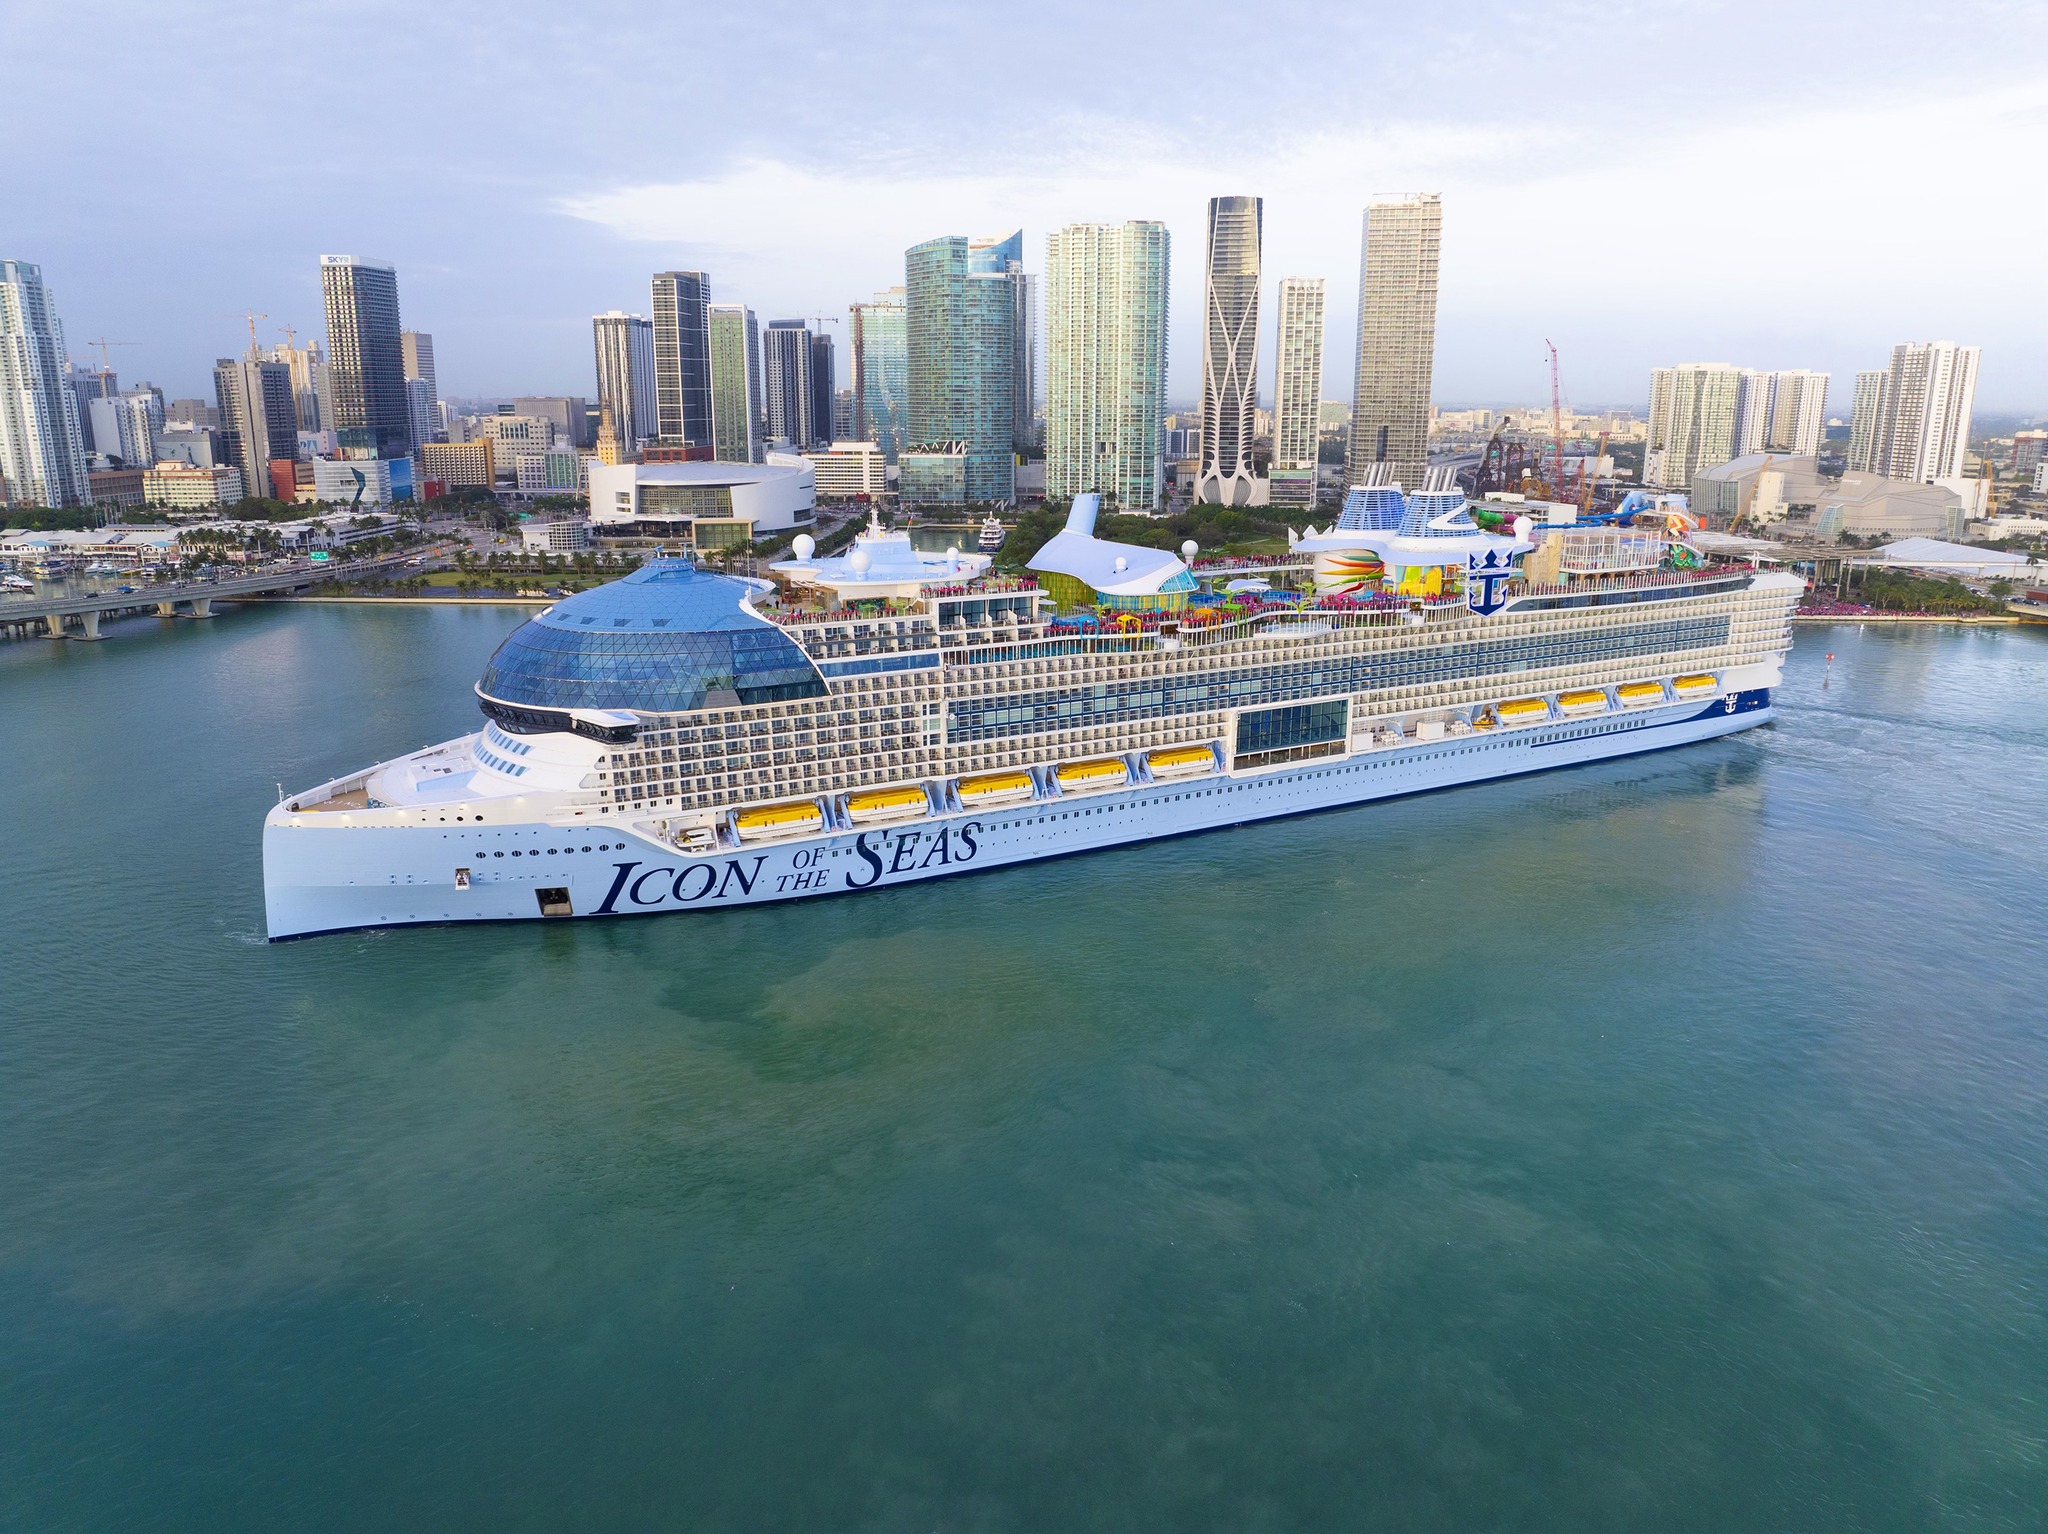 Icon of the seas will be making its inaugural St. Maarten